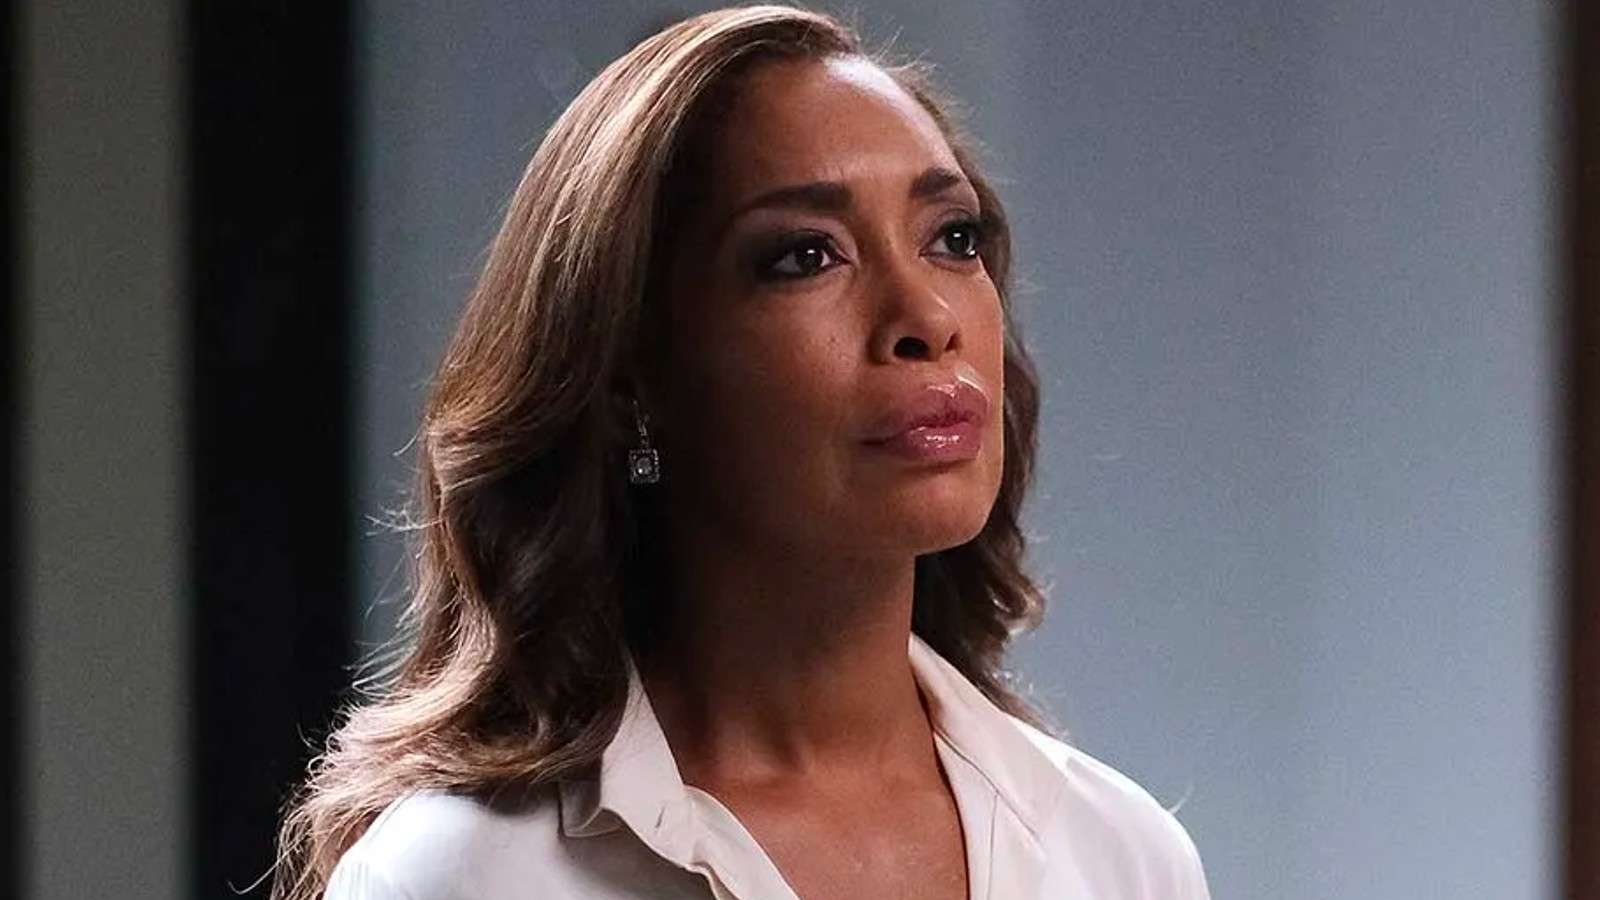 Gina Torres in her Suits spinoff Pearson